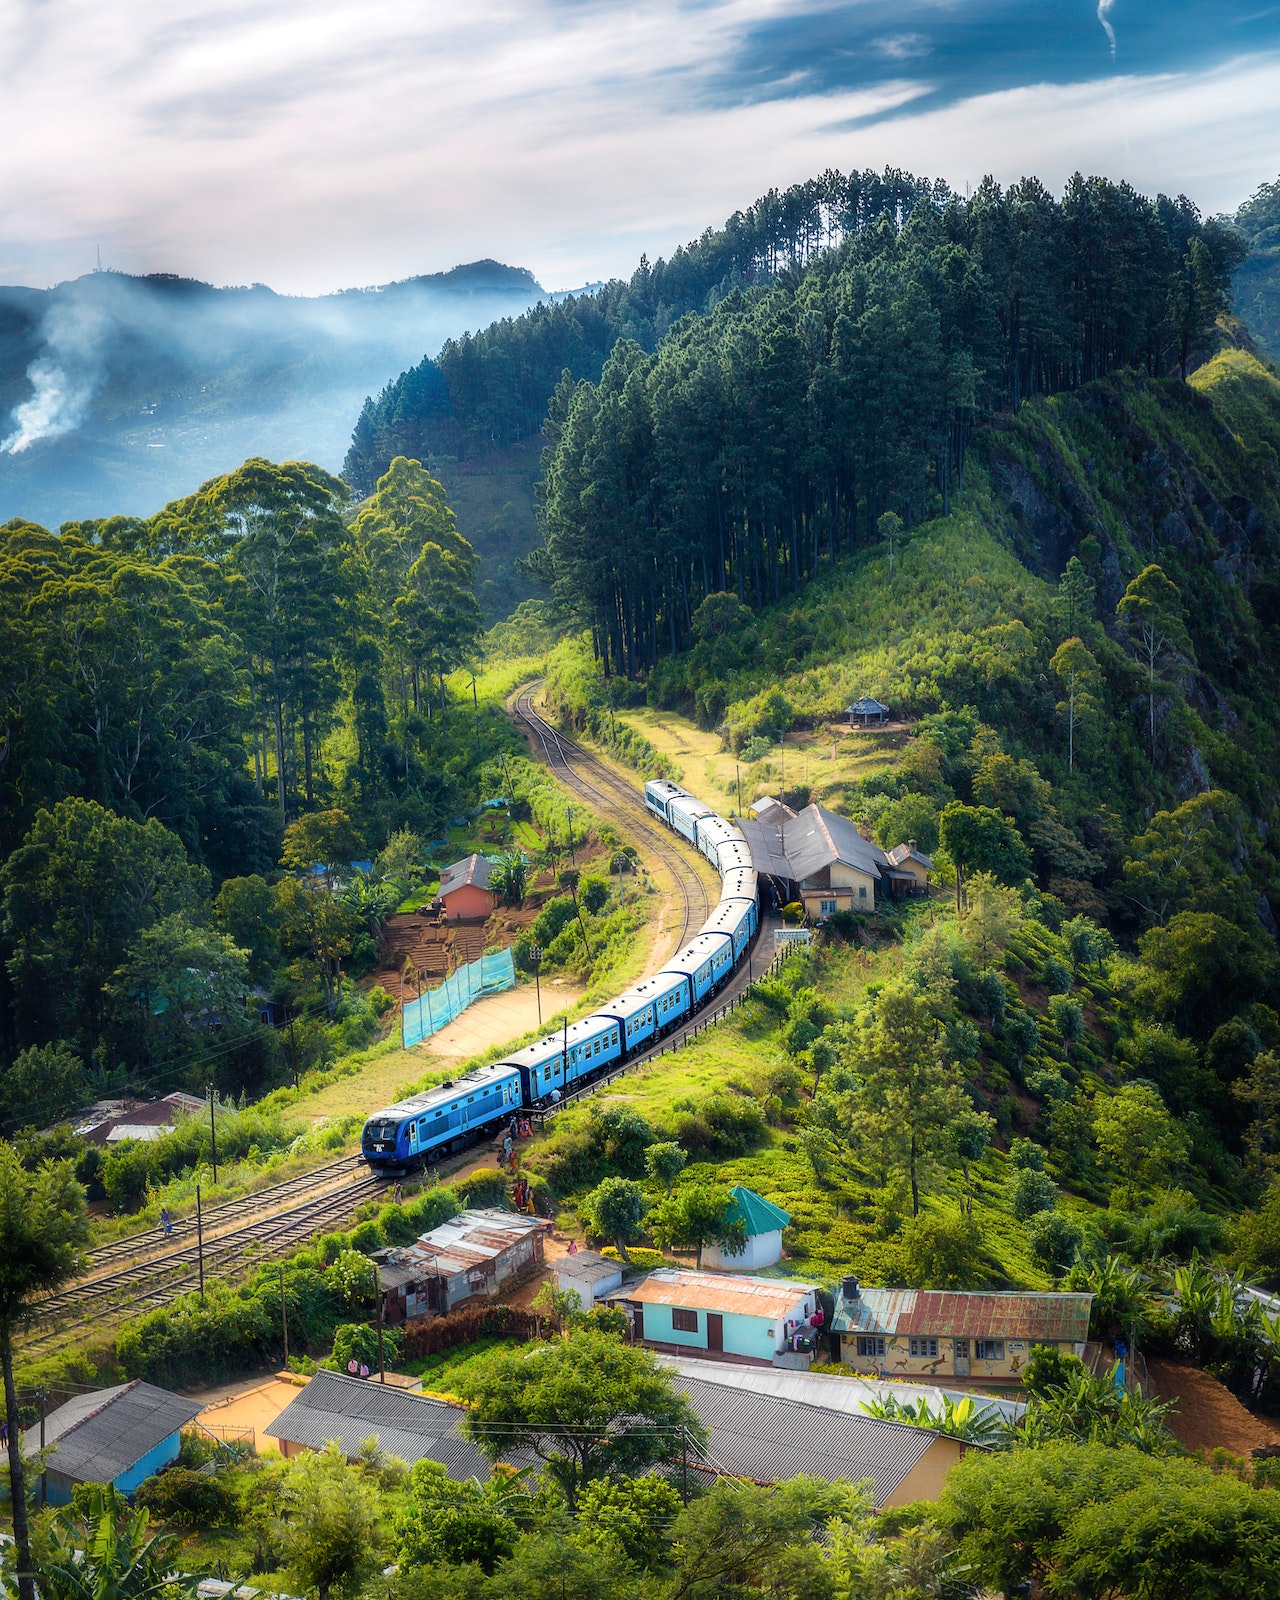 The Most Scenic Train Rides in the World That You Need to Experience